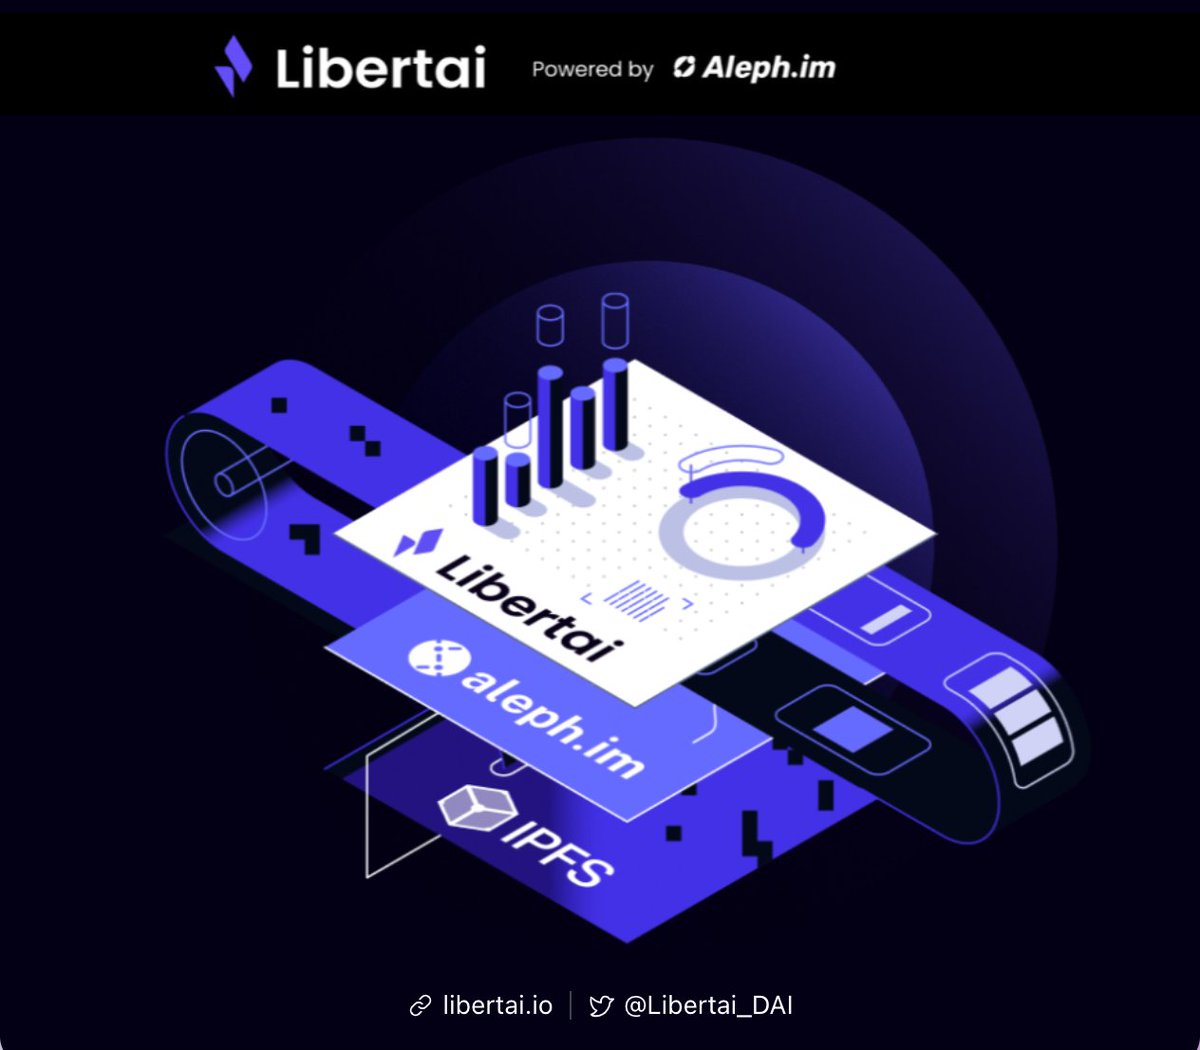 🚀 Libertai, leading the frontier of decentralized AI in the @Aleph_im network. Text generation is now live🤖 Experience fully decentralized CPU computing matching GPU speeds! Nodes look for VMs to power robust LLMs from IPFS. Connect at chat.libertai.io💥